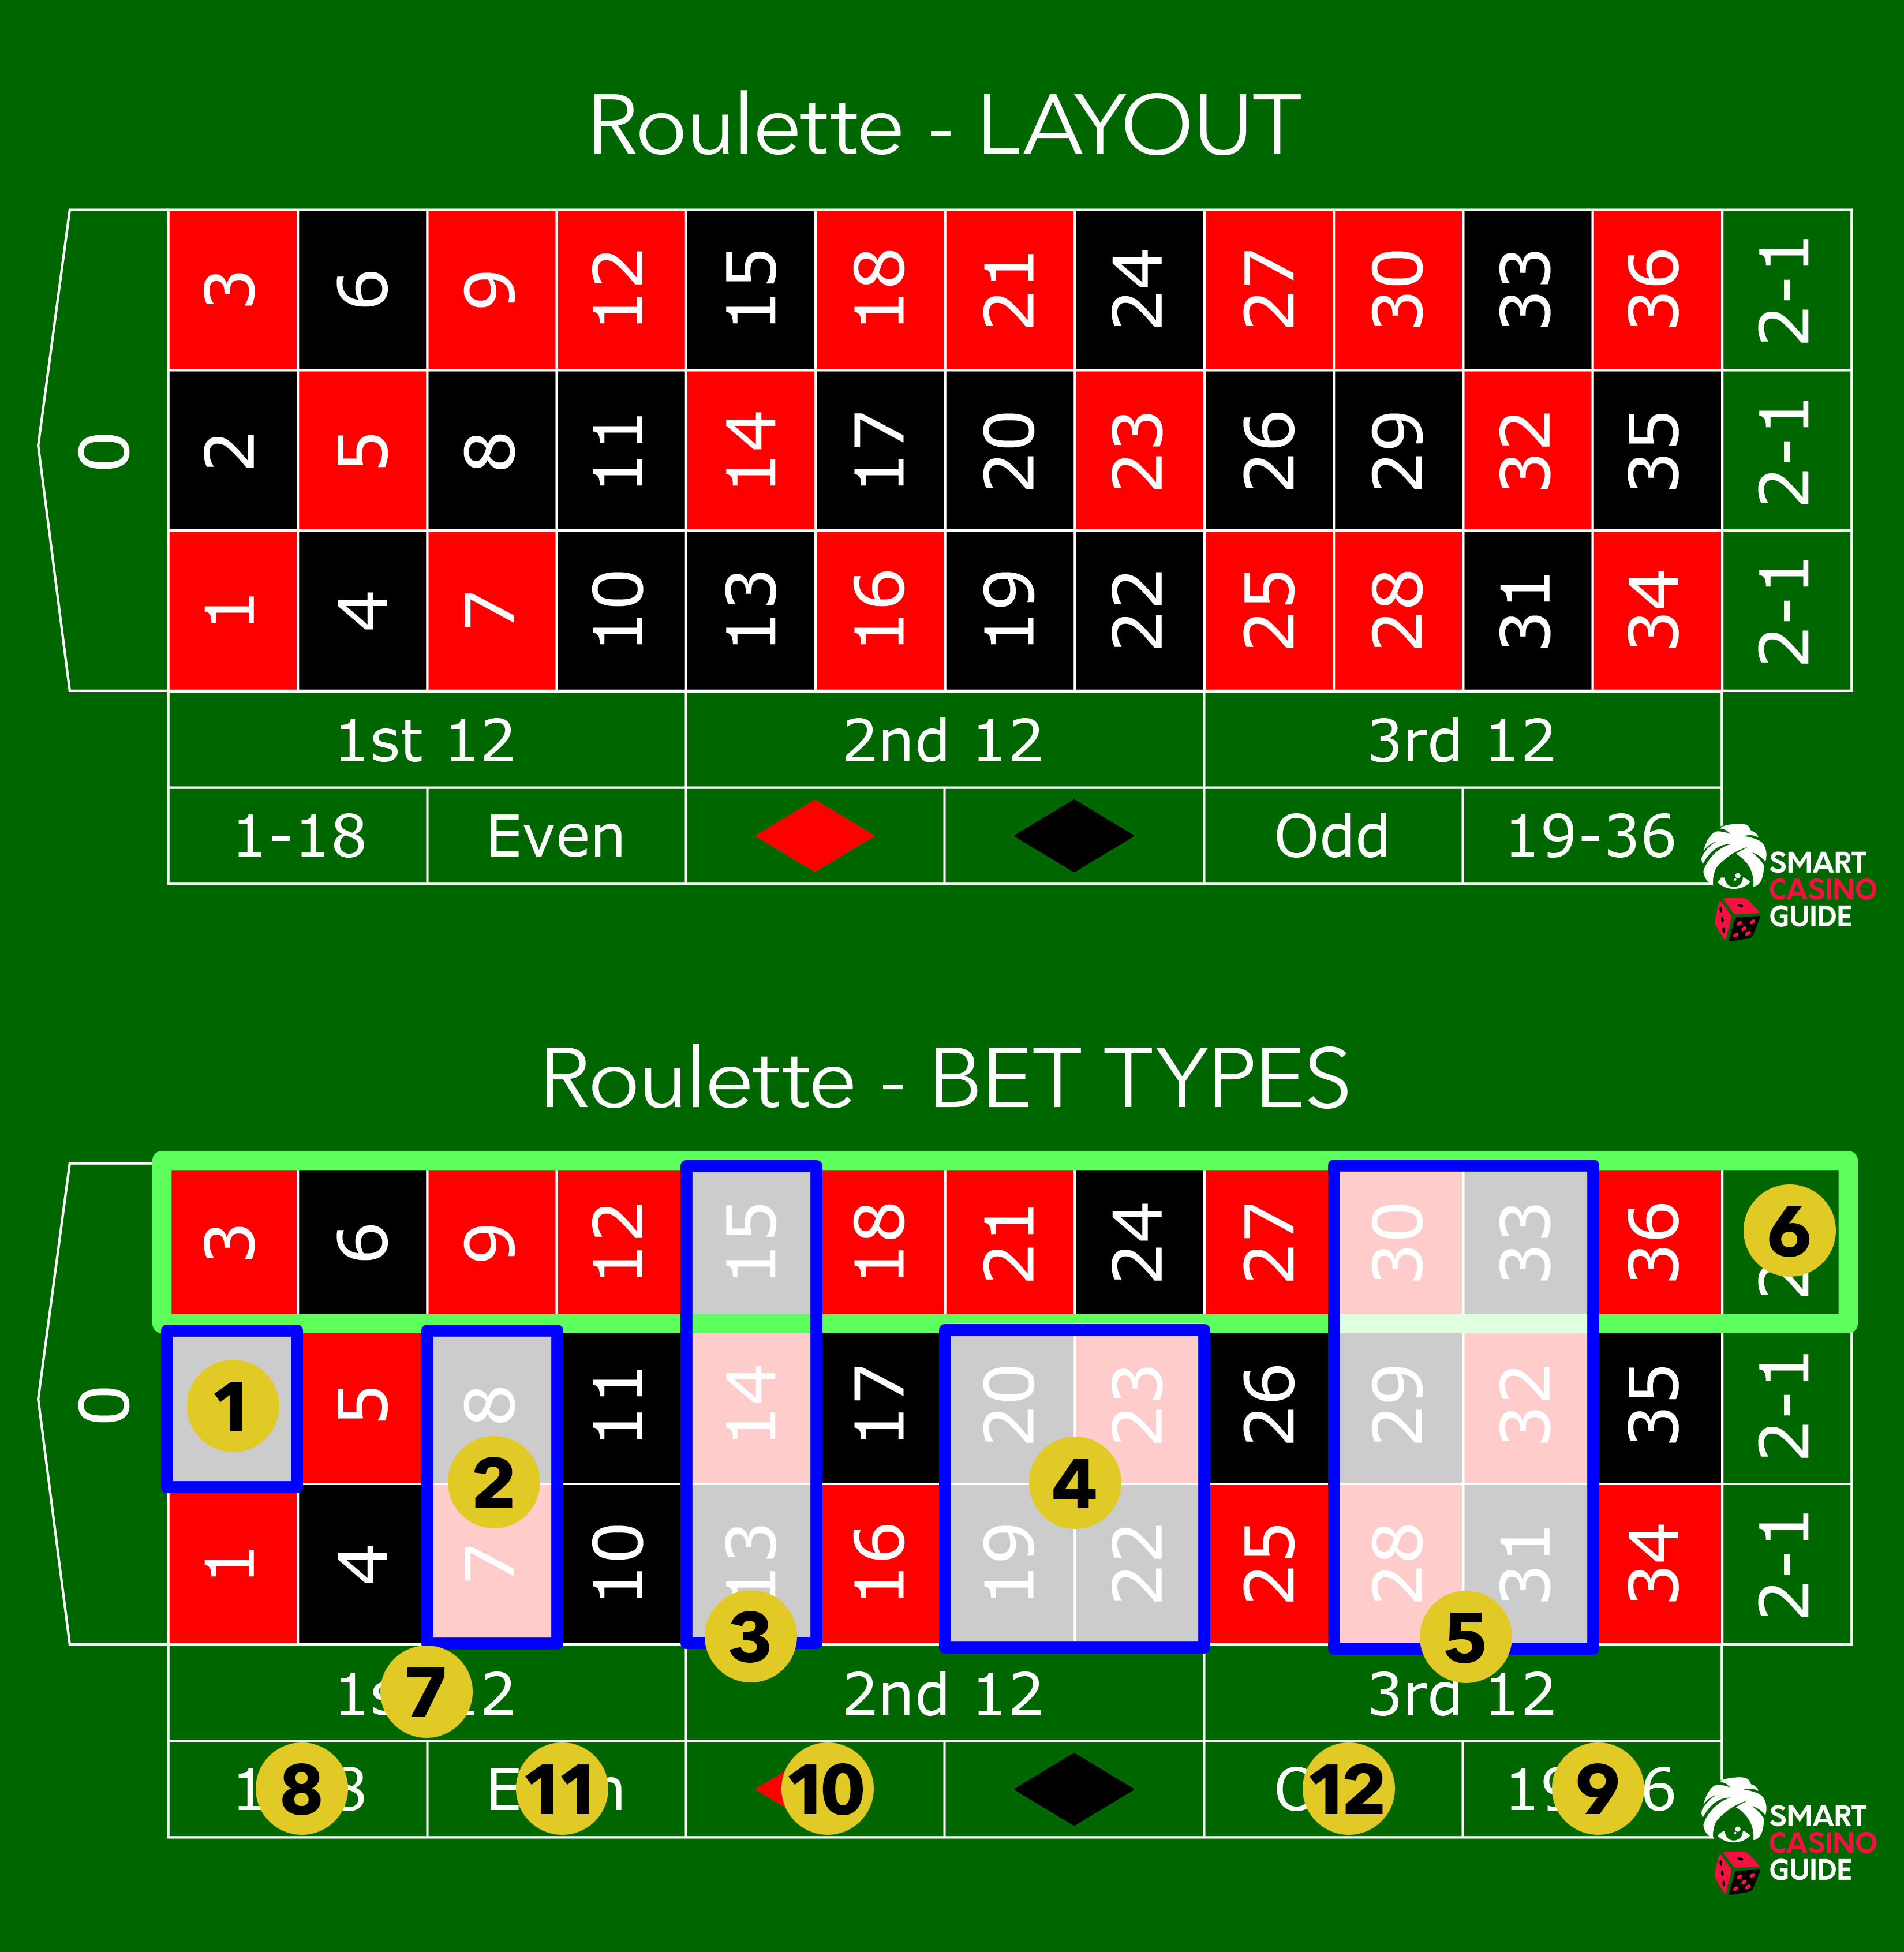 Odds on roulette betting systems make 100 dollars a day investing for retirement